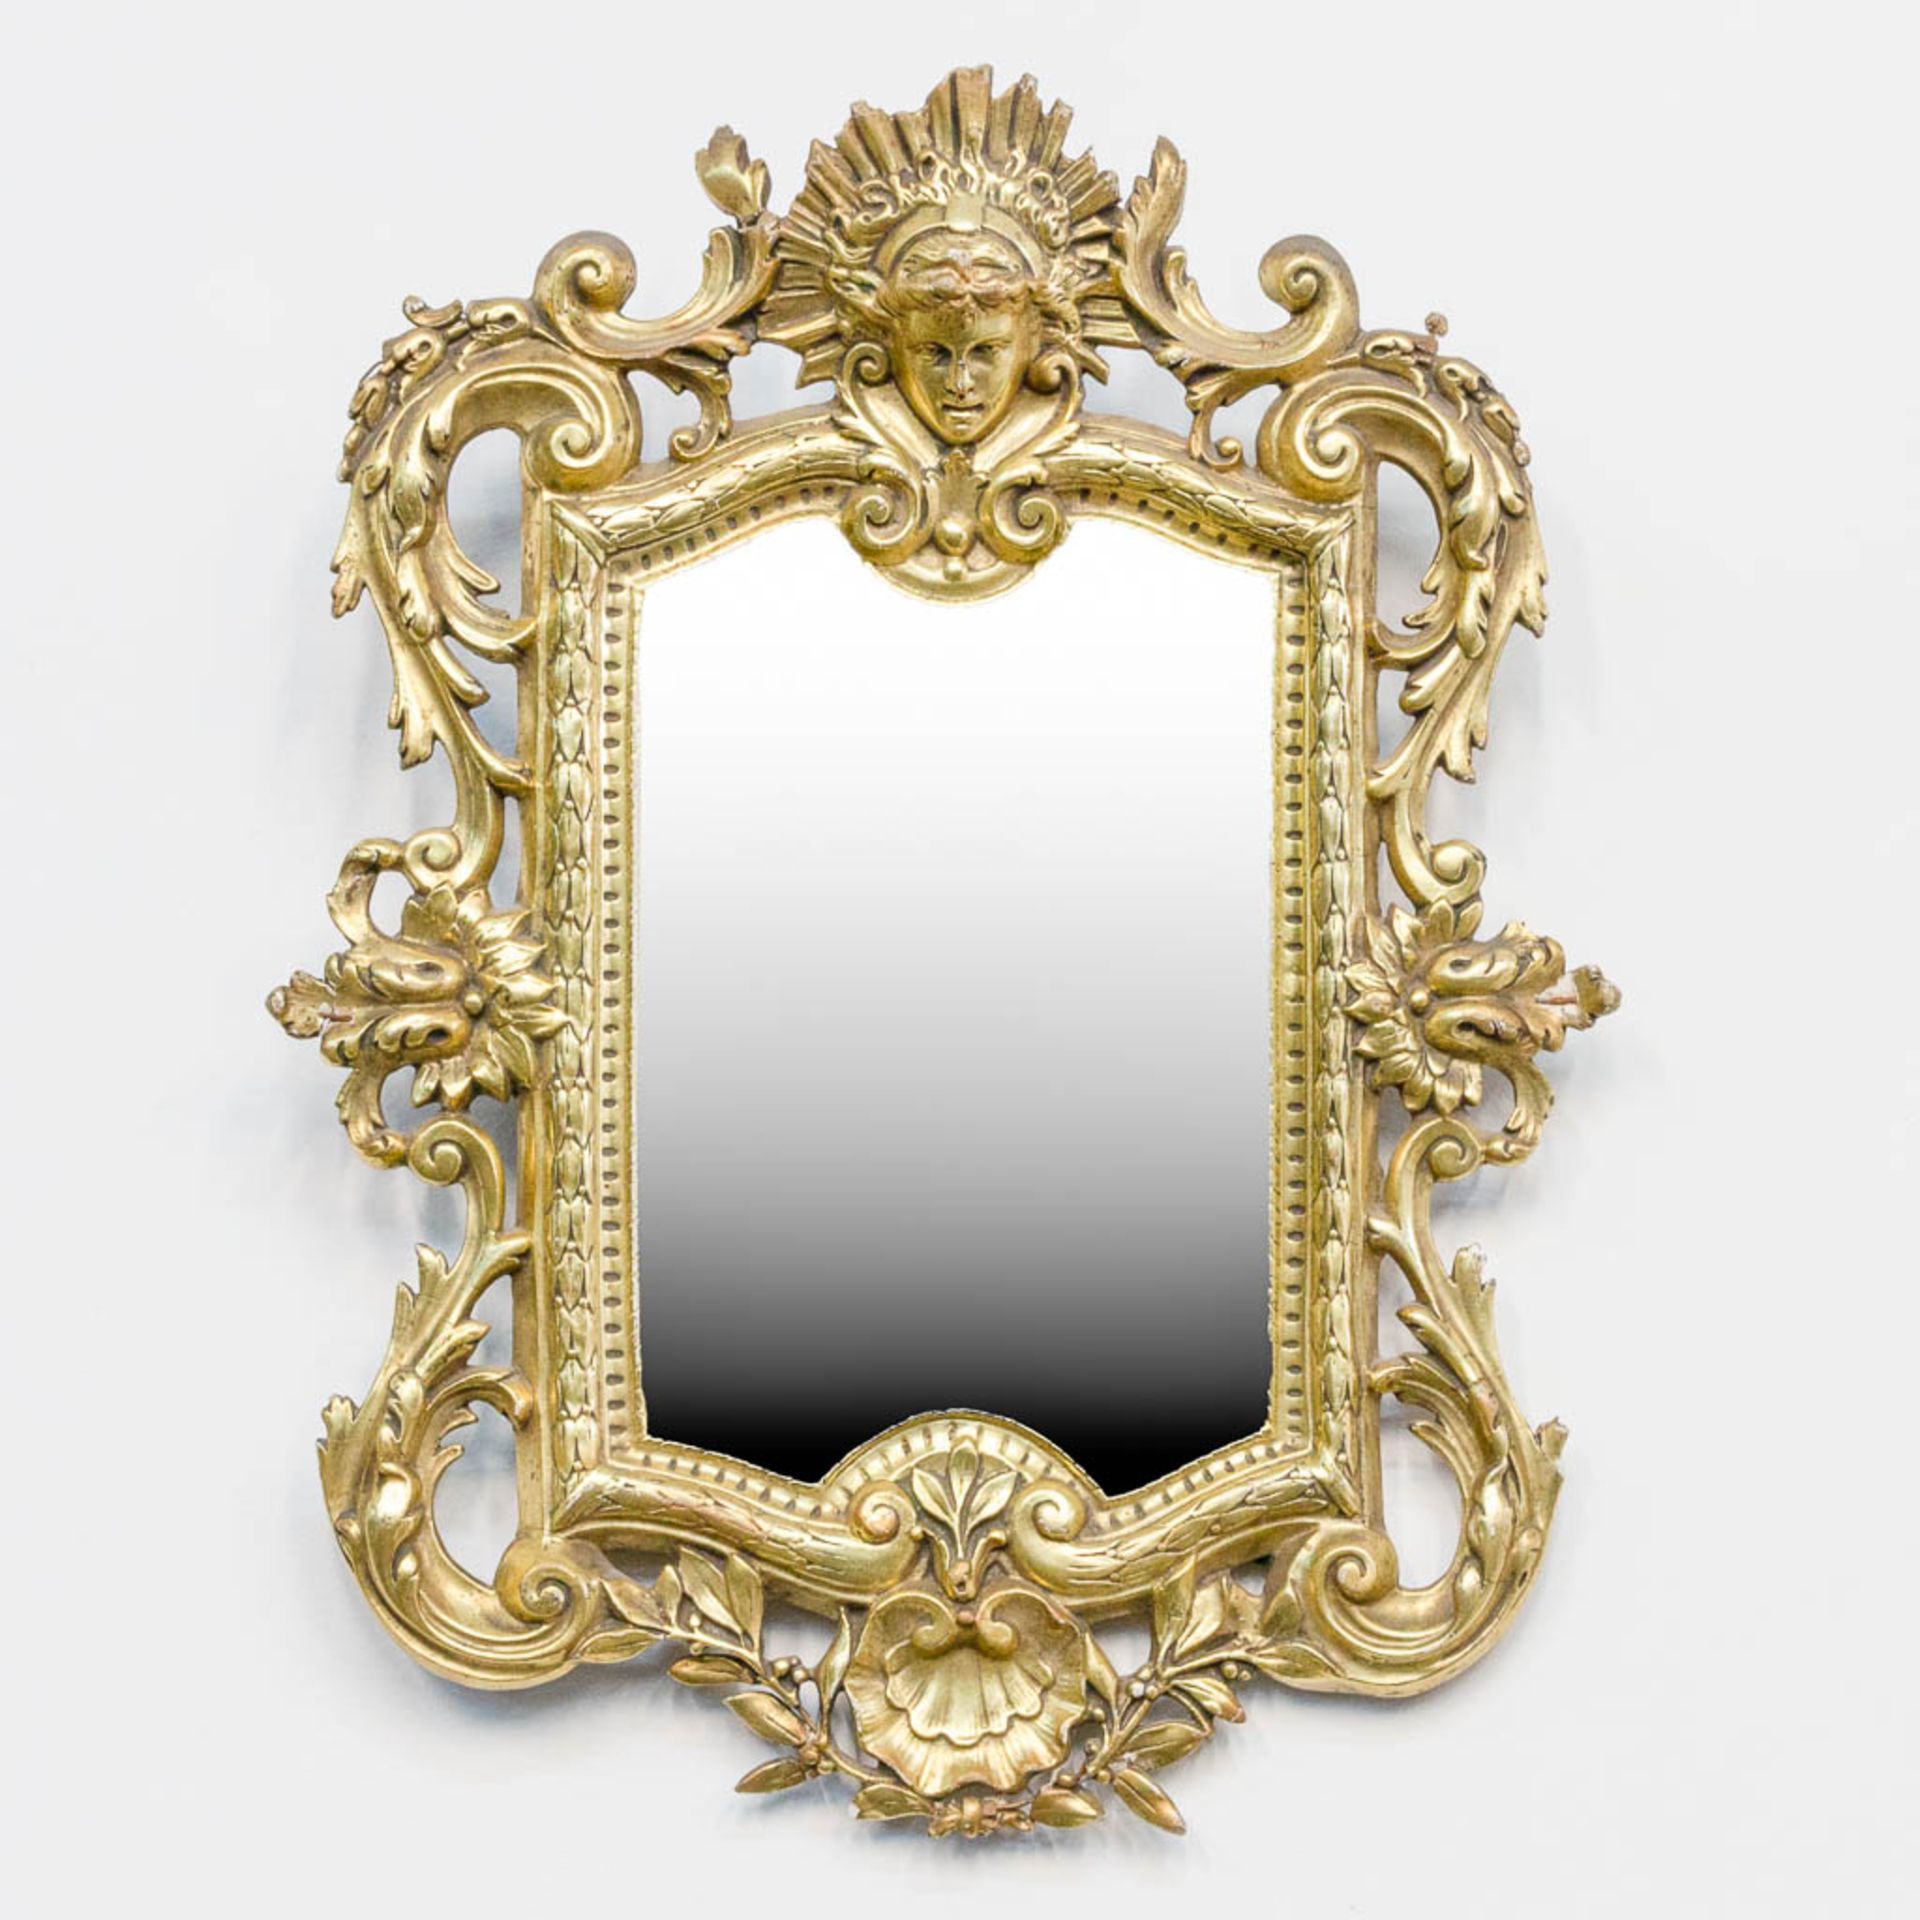 A mirror in Louis XV style, made of gold plated stuco.